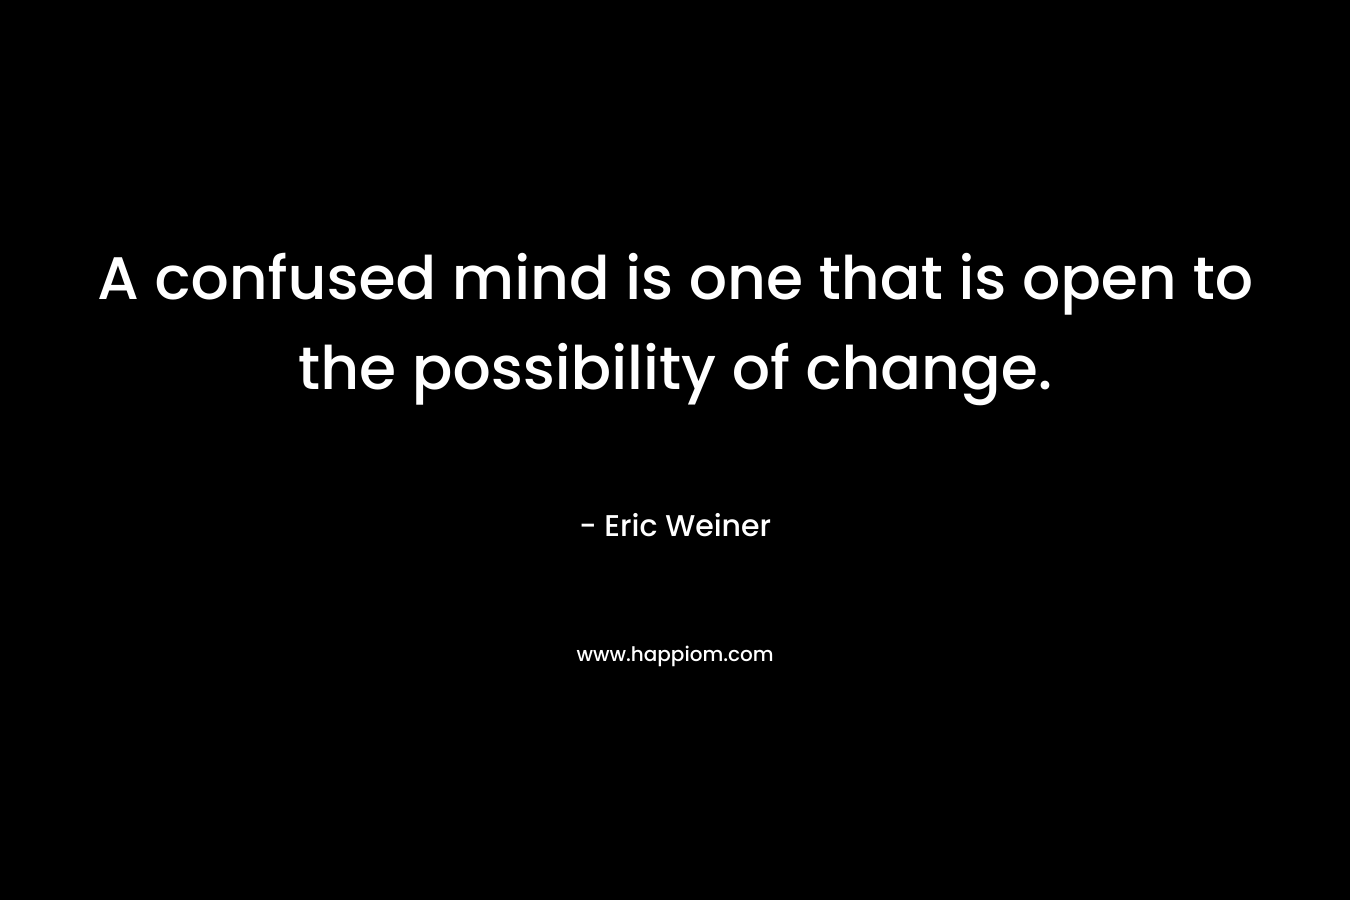 A confused mind is one that is open to the possibility of change.